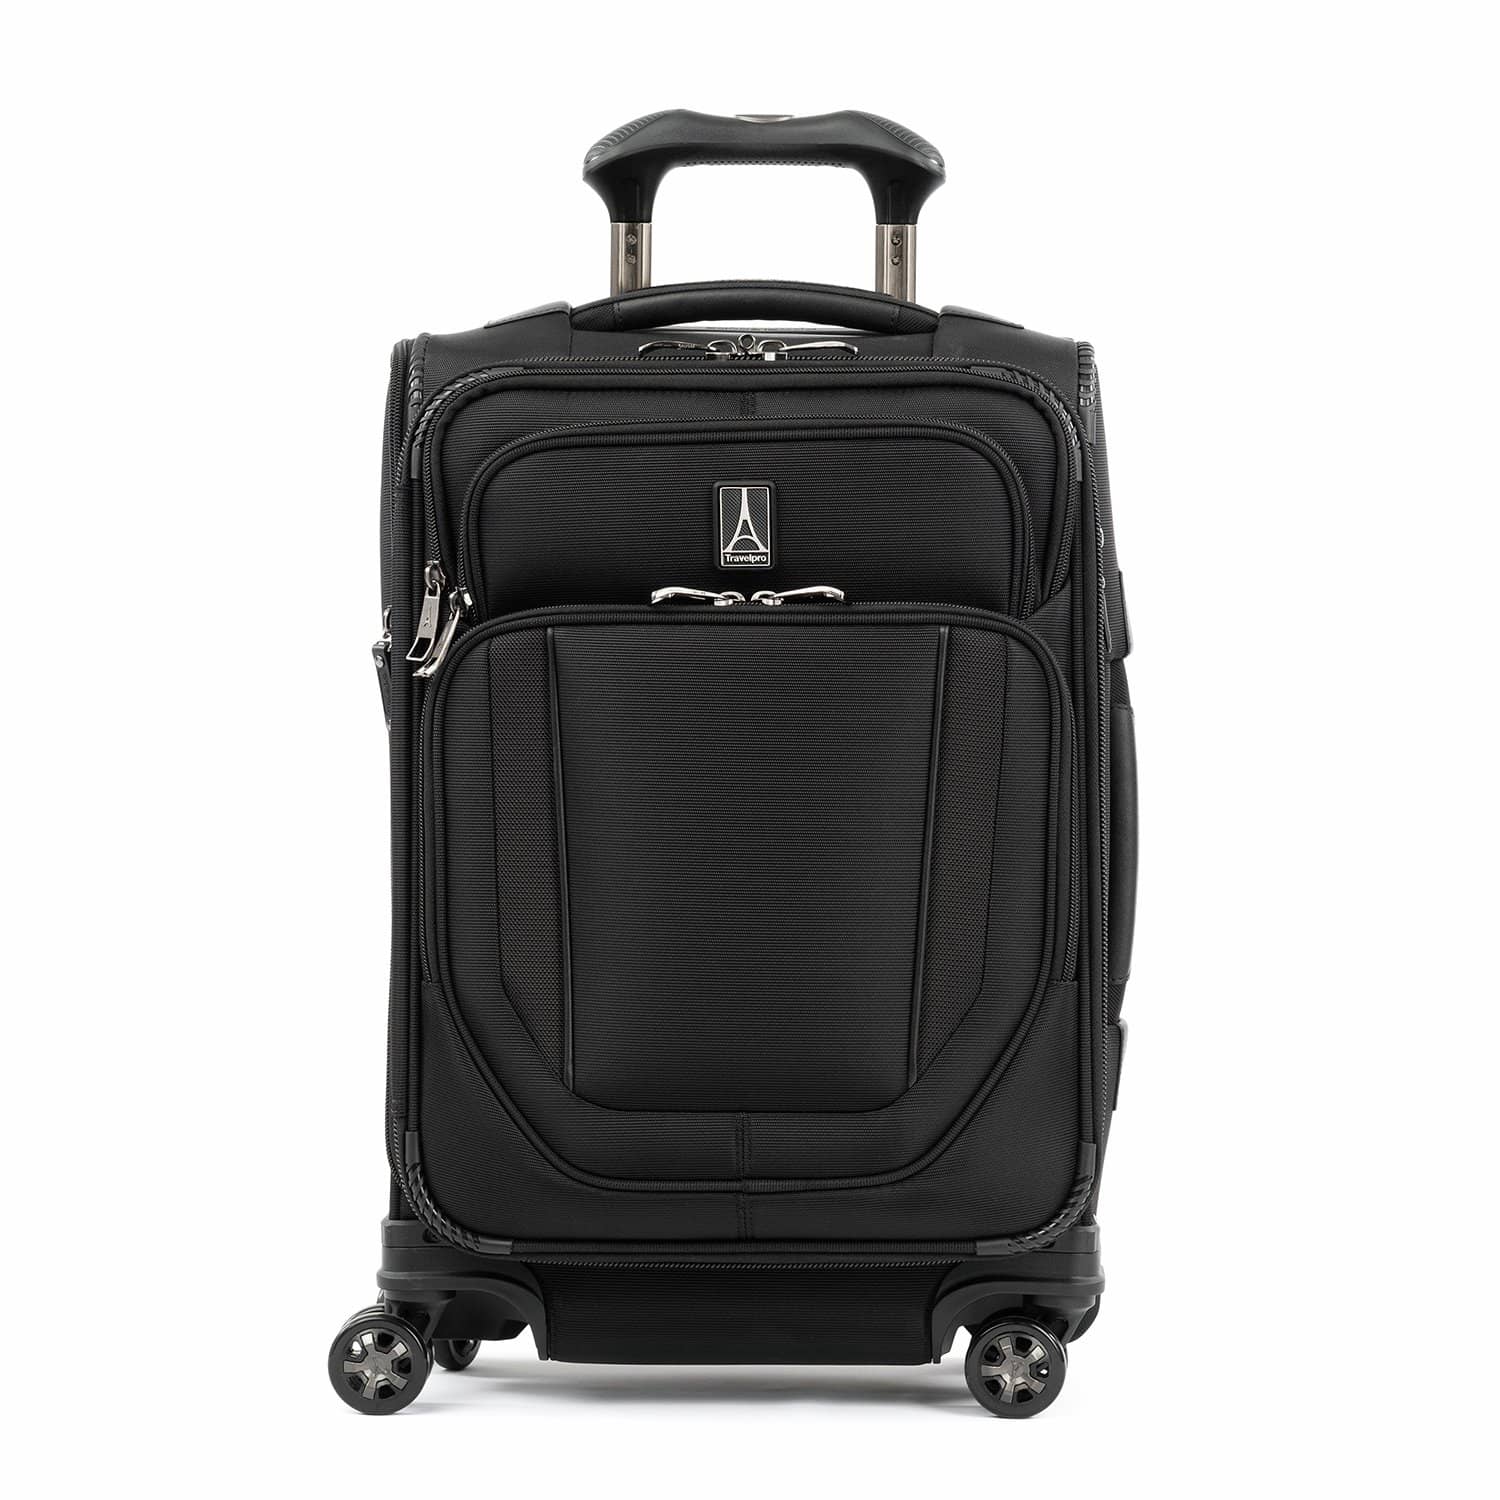 travelpro carry on garment bag